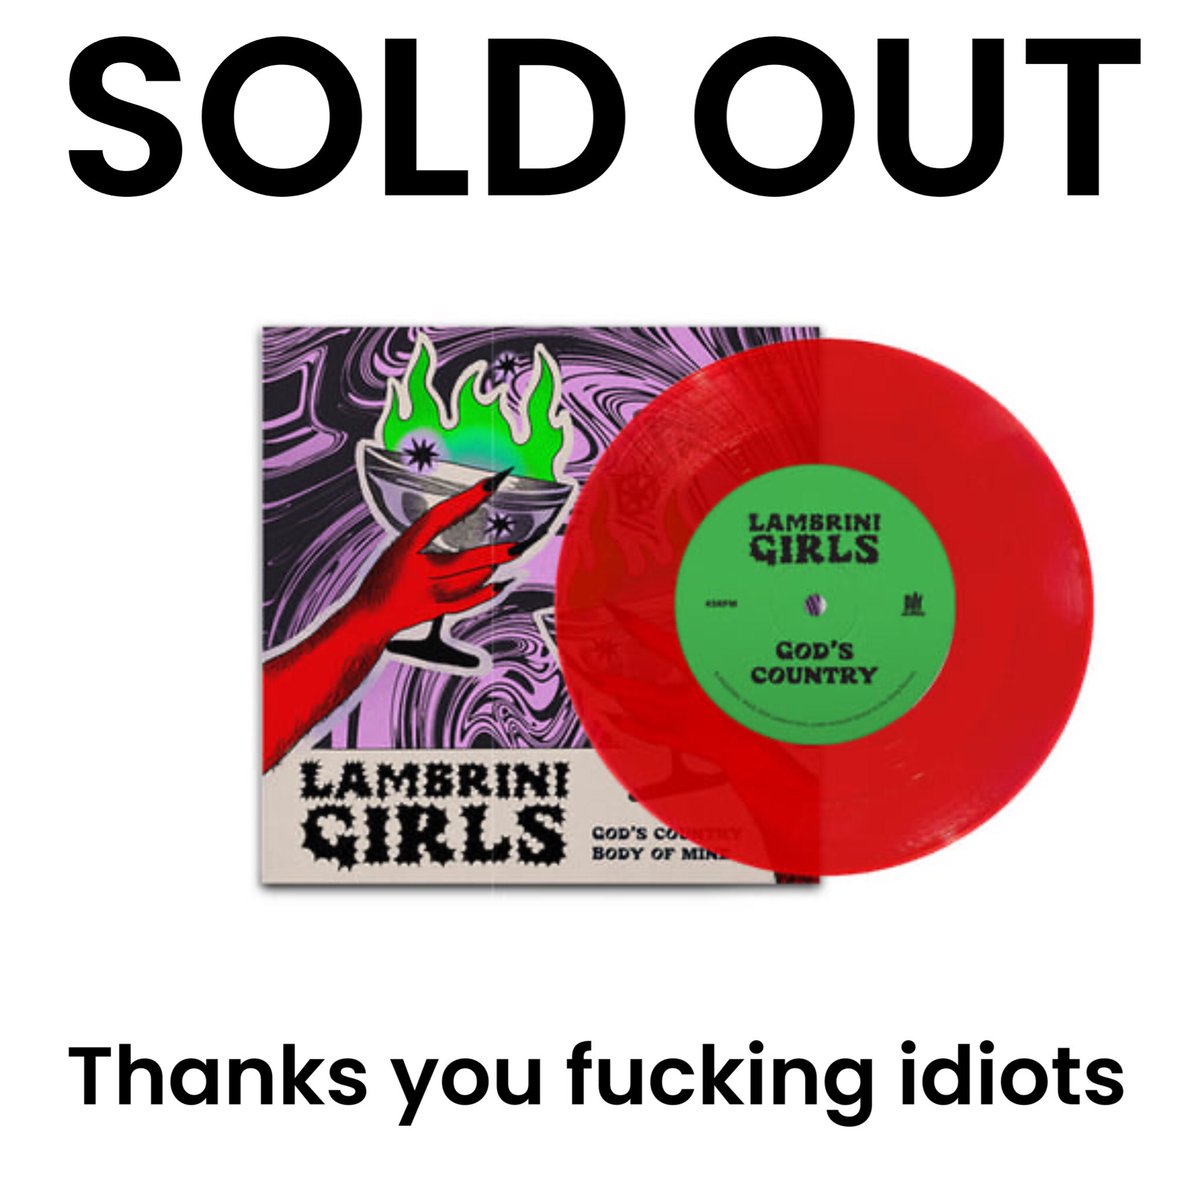 Holy shit that was quick. If you missed out on the LTD 7” Red Vinyl - all is not lost. News Friday x